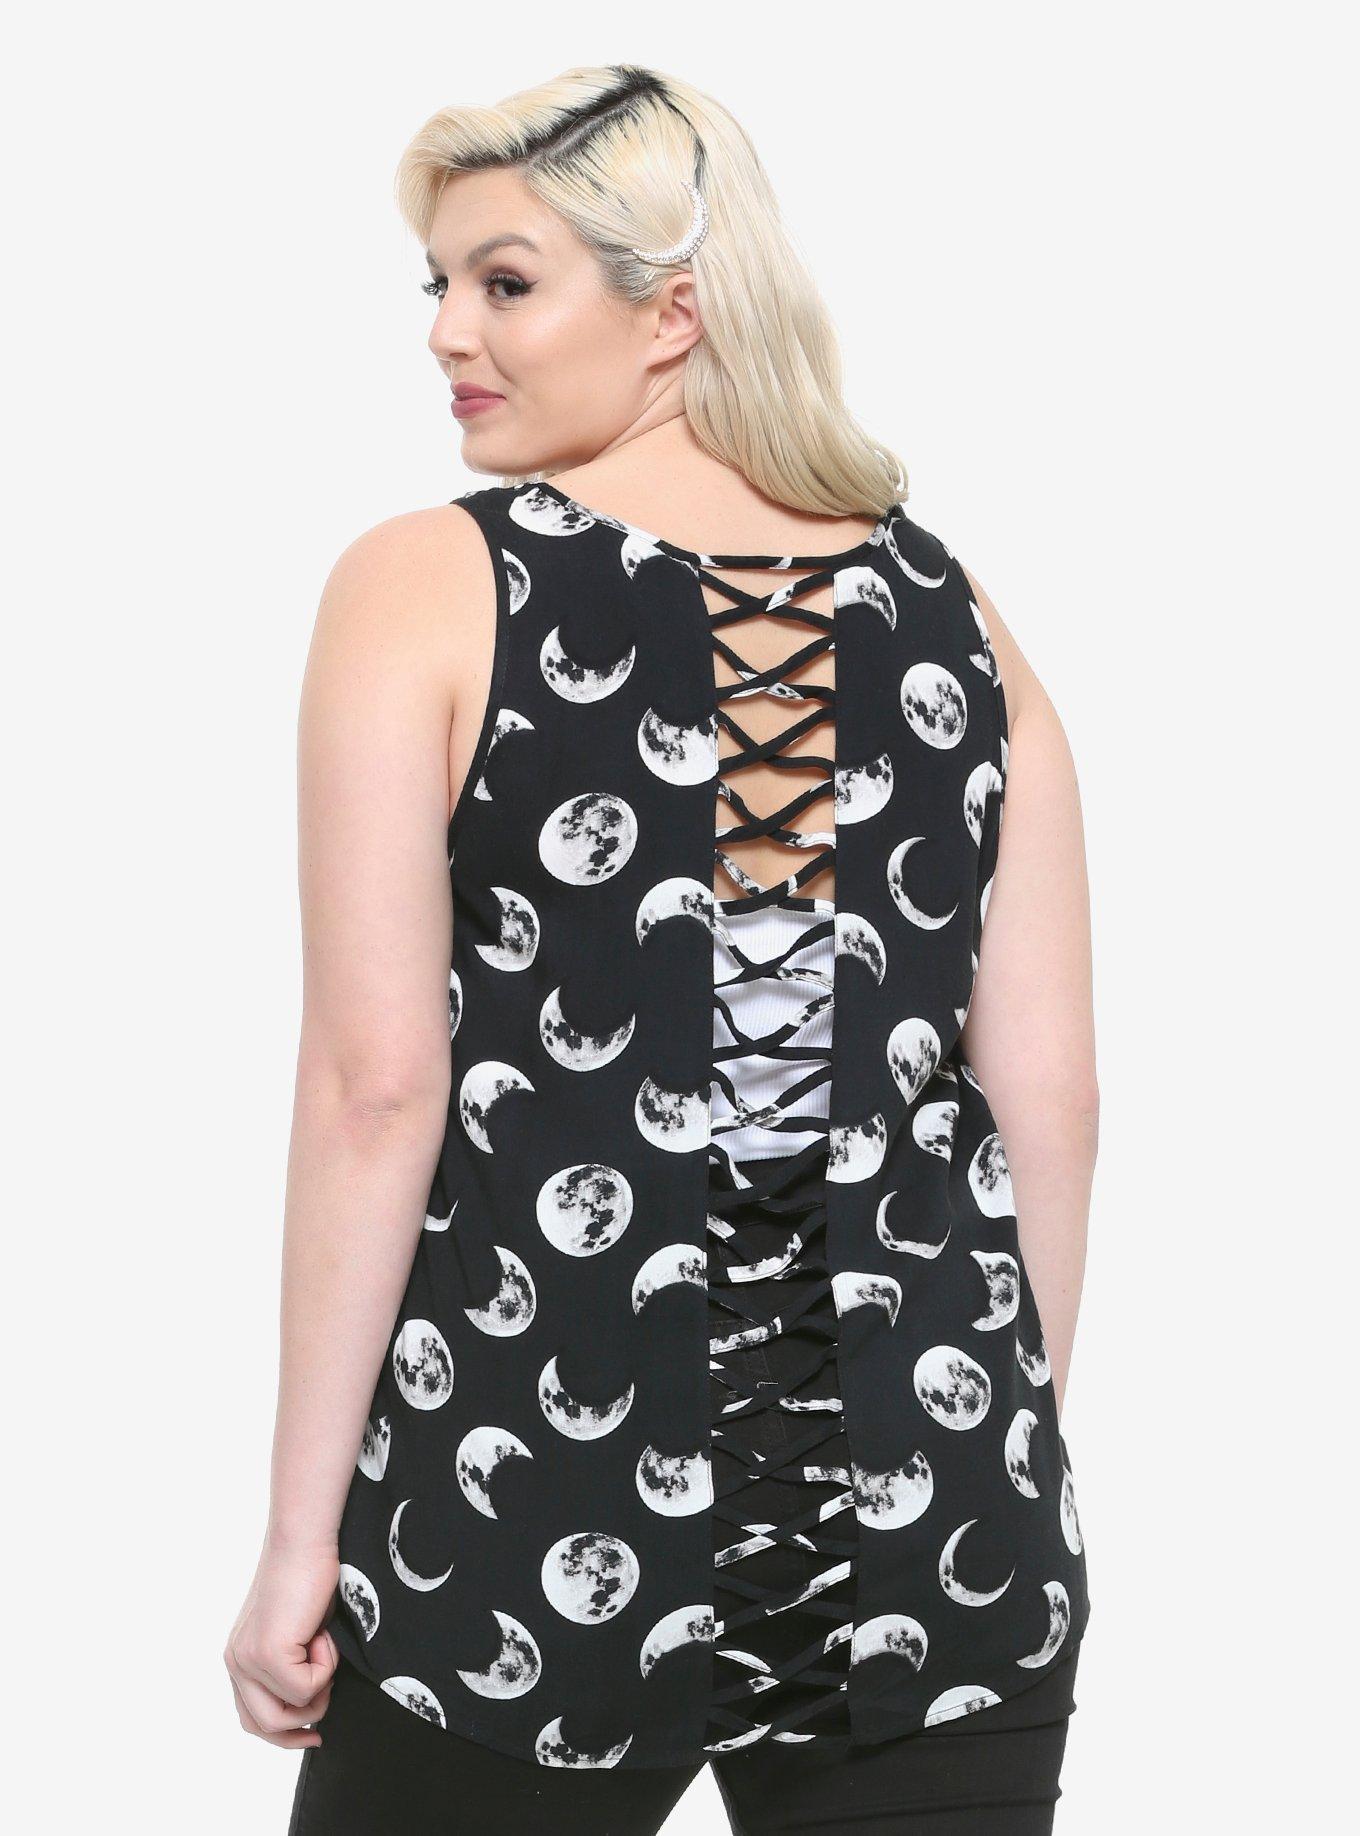 Moon Phases Strappy Back Girls Tank Top Plus Size, MULTI, alternate